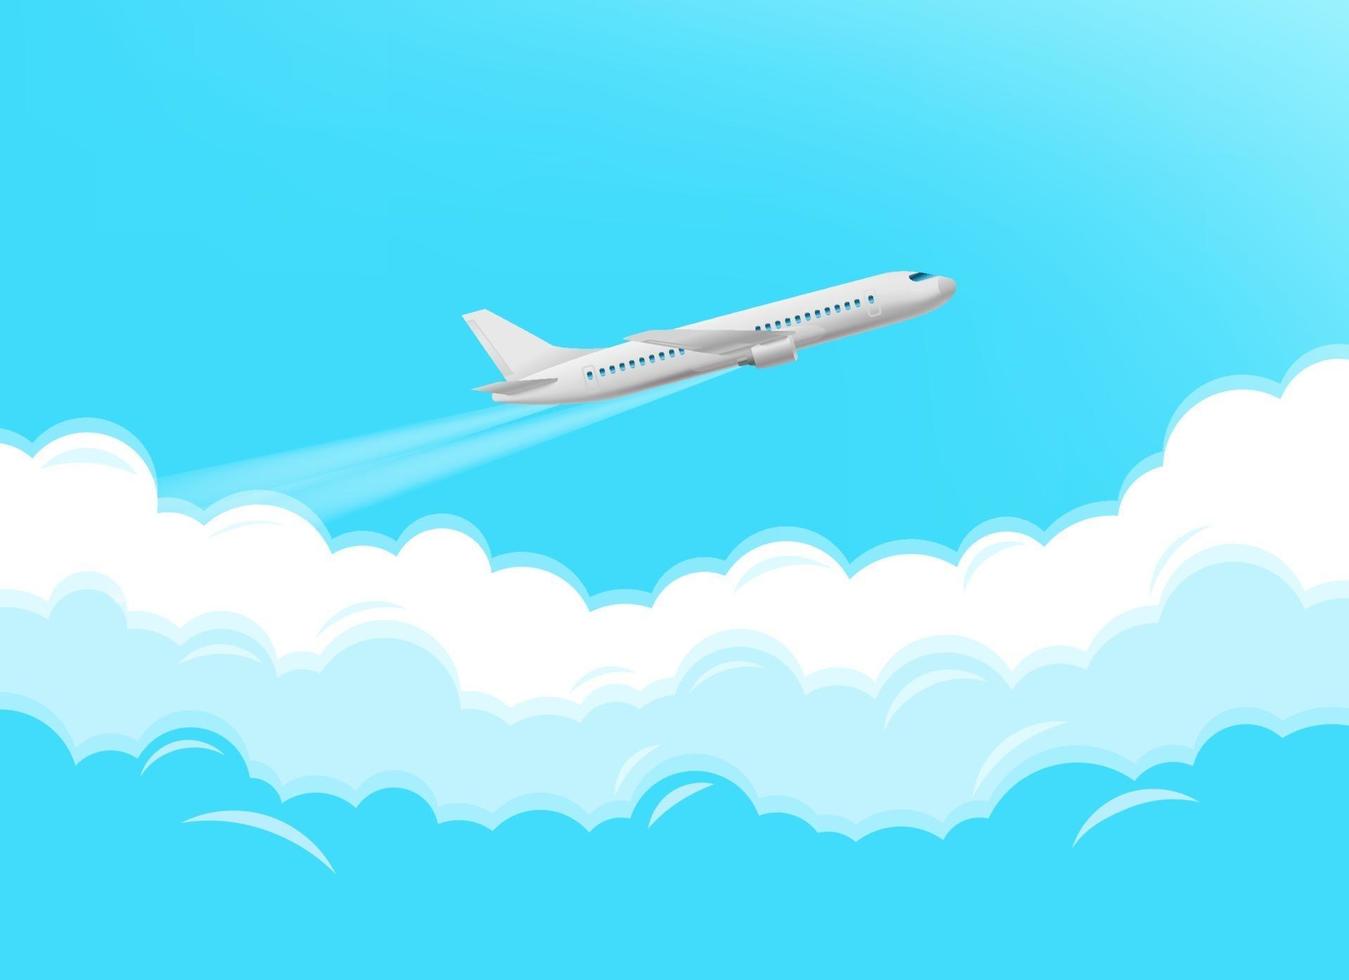 Aircraft flying through the clouds vector